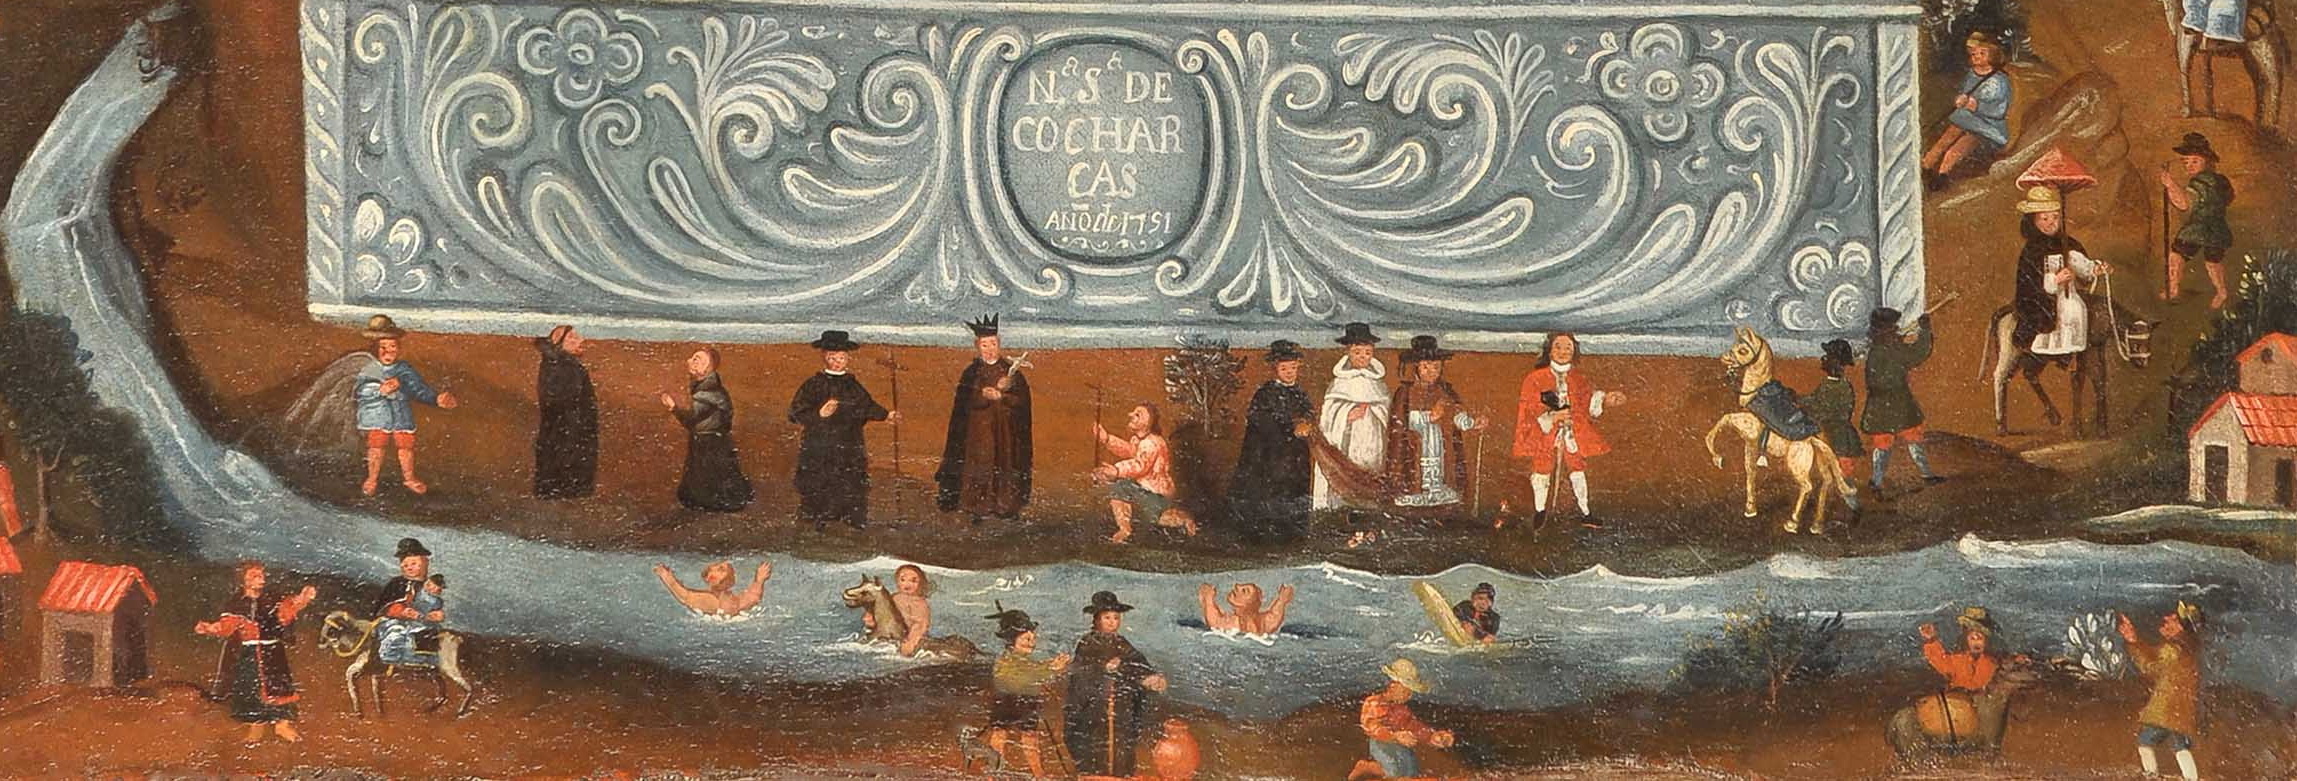 A detail of a colonial painting of people in a river, surrounded by clergy and slaves.